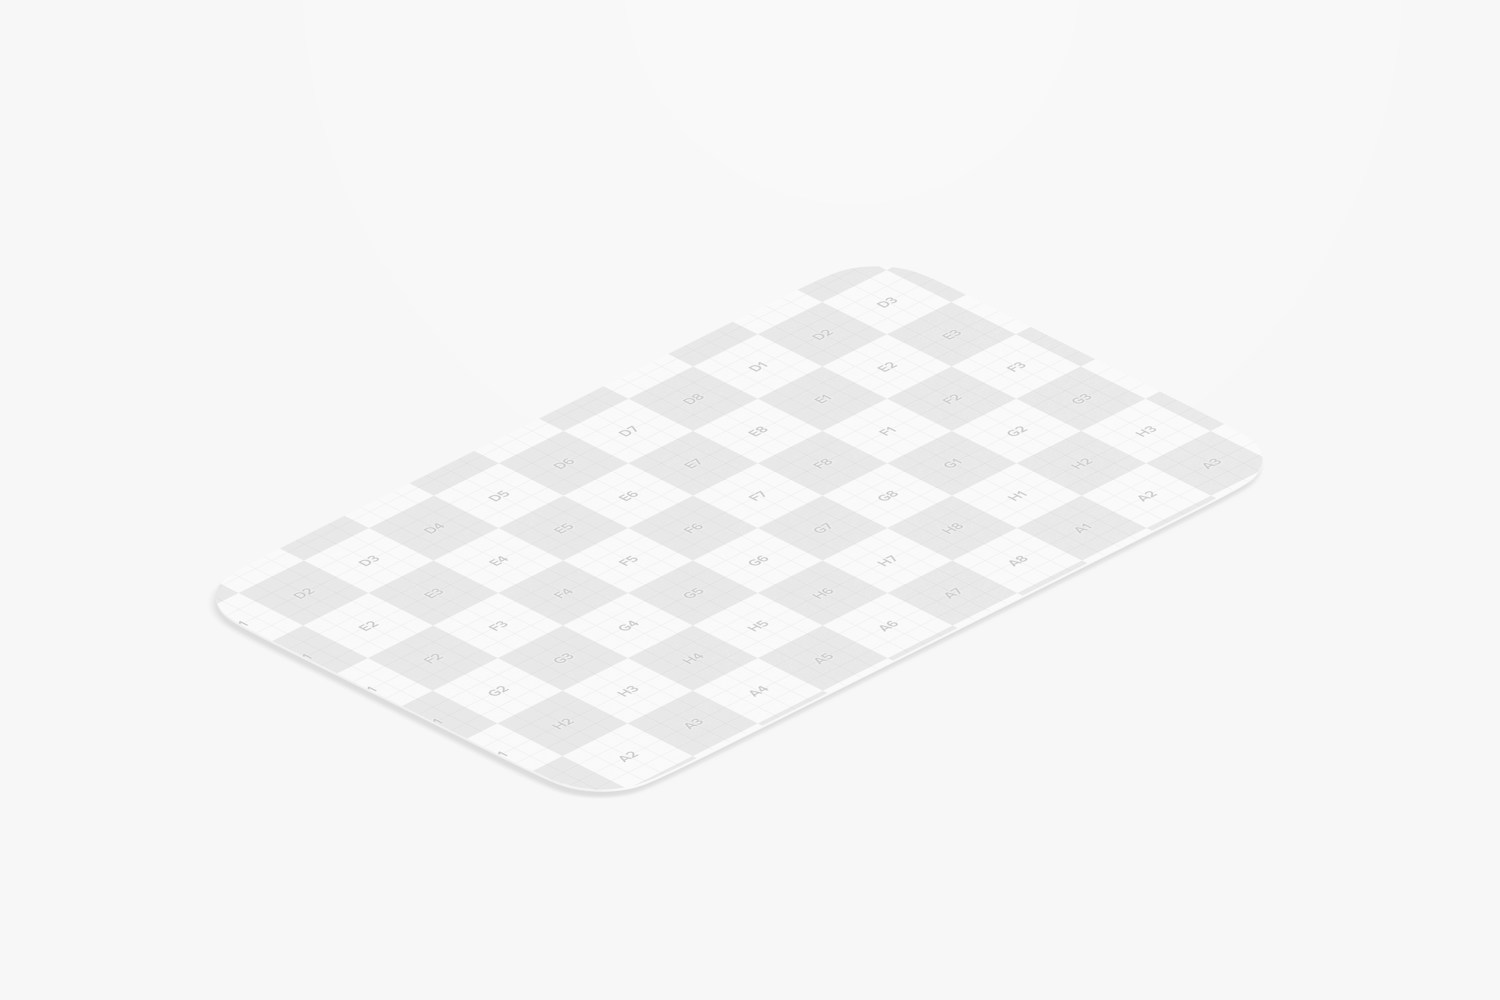 Rounded Corner Business Card Mockup, Isometric Left View